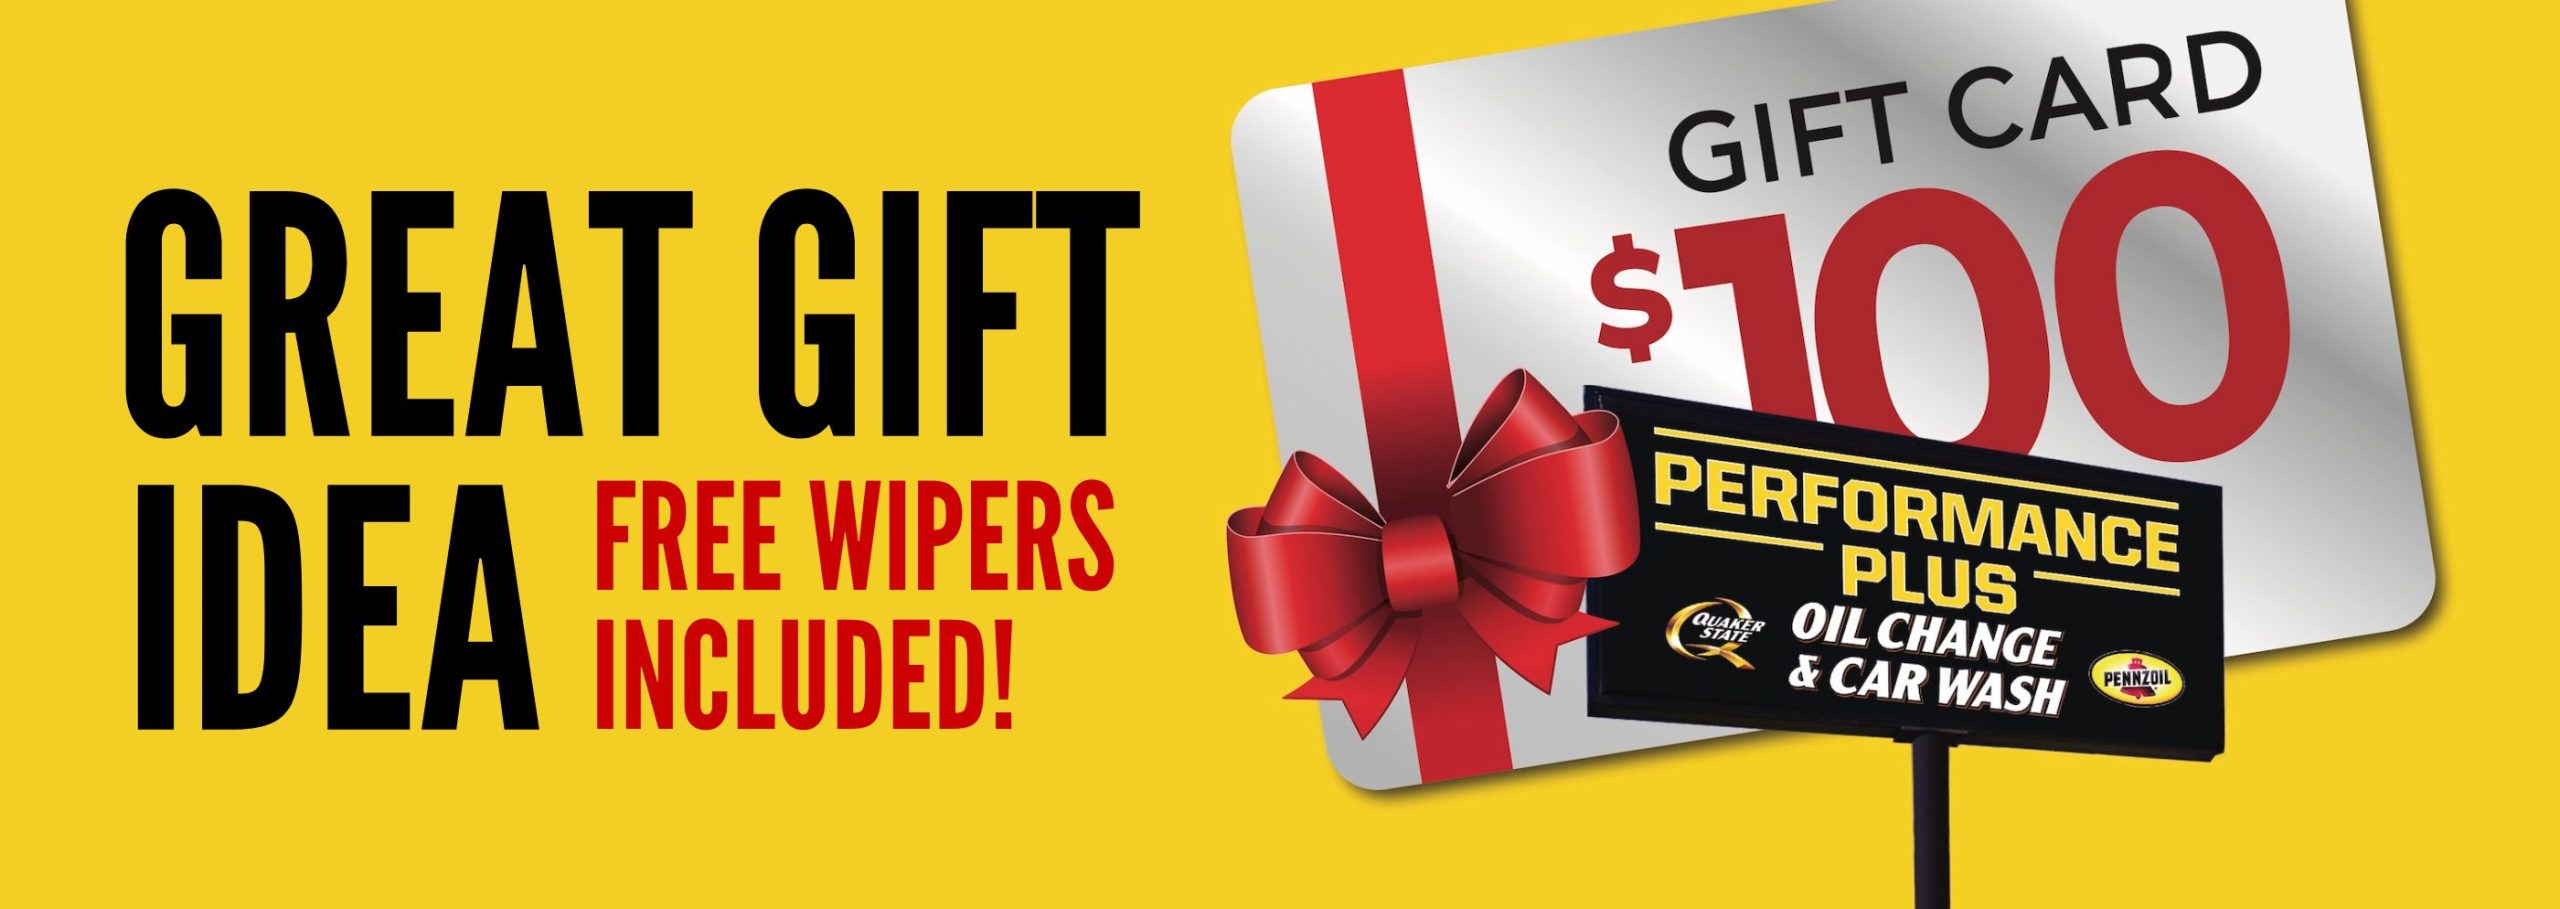 Performance Plus Gift Card